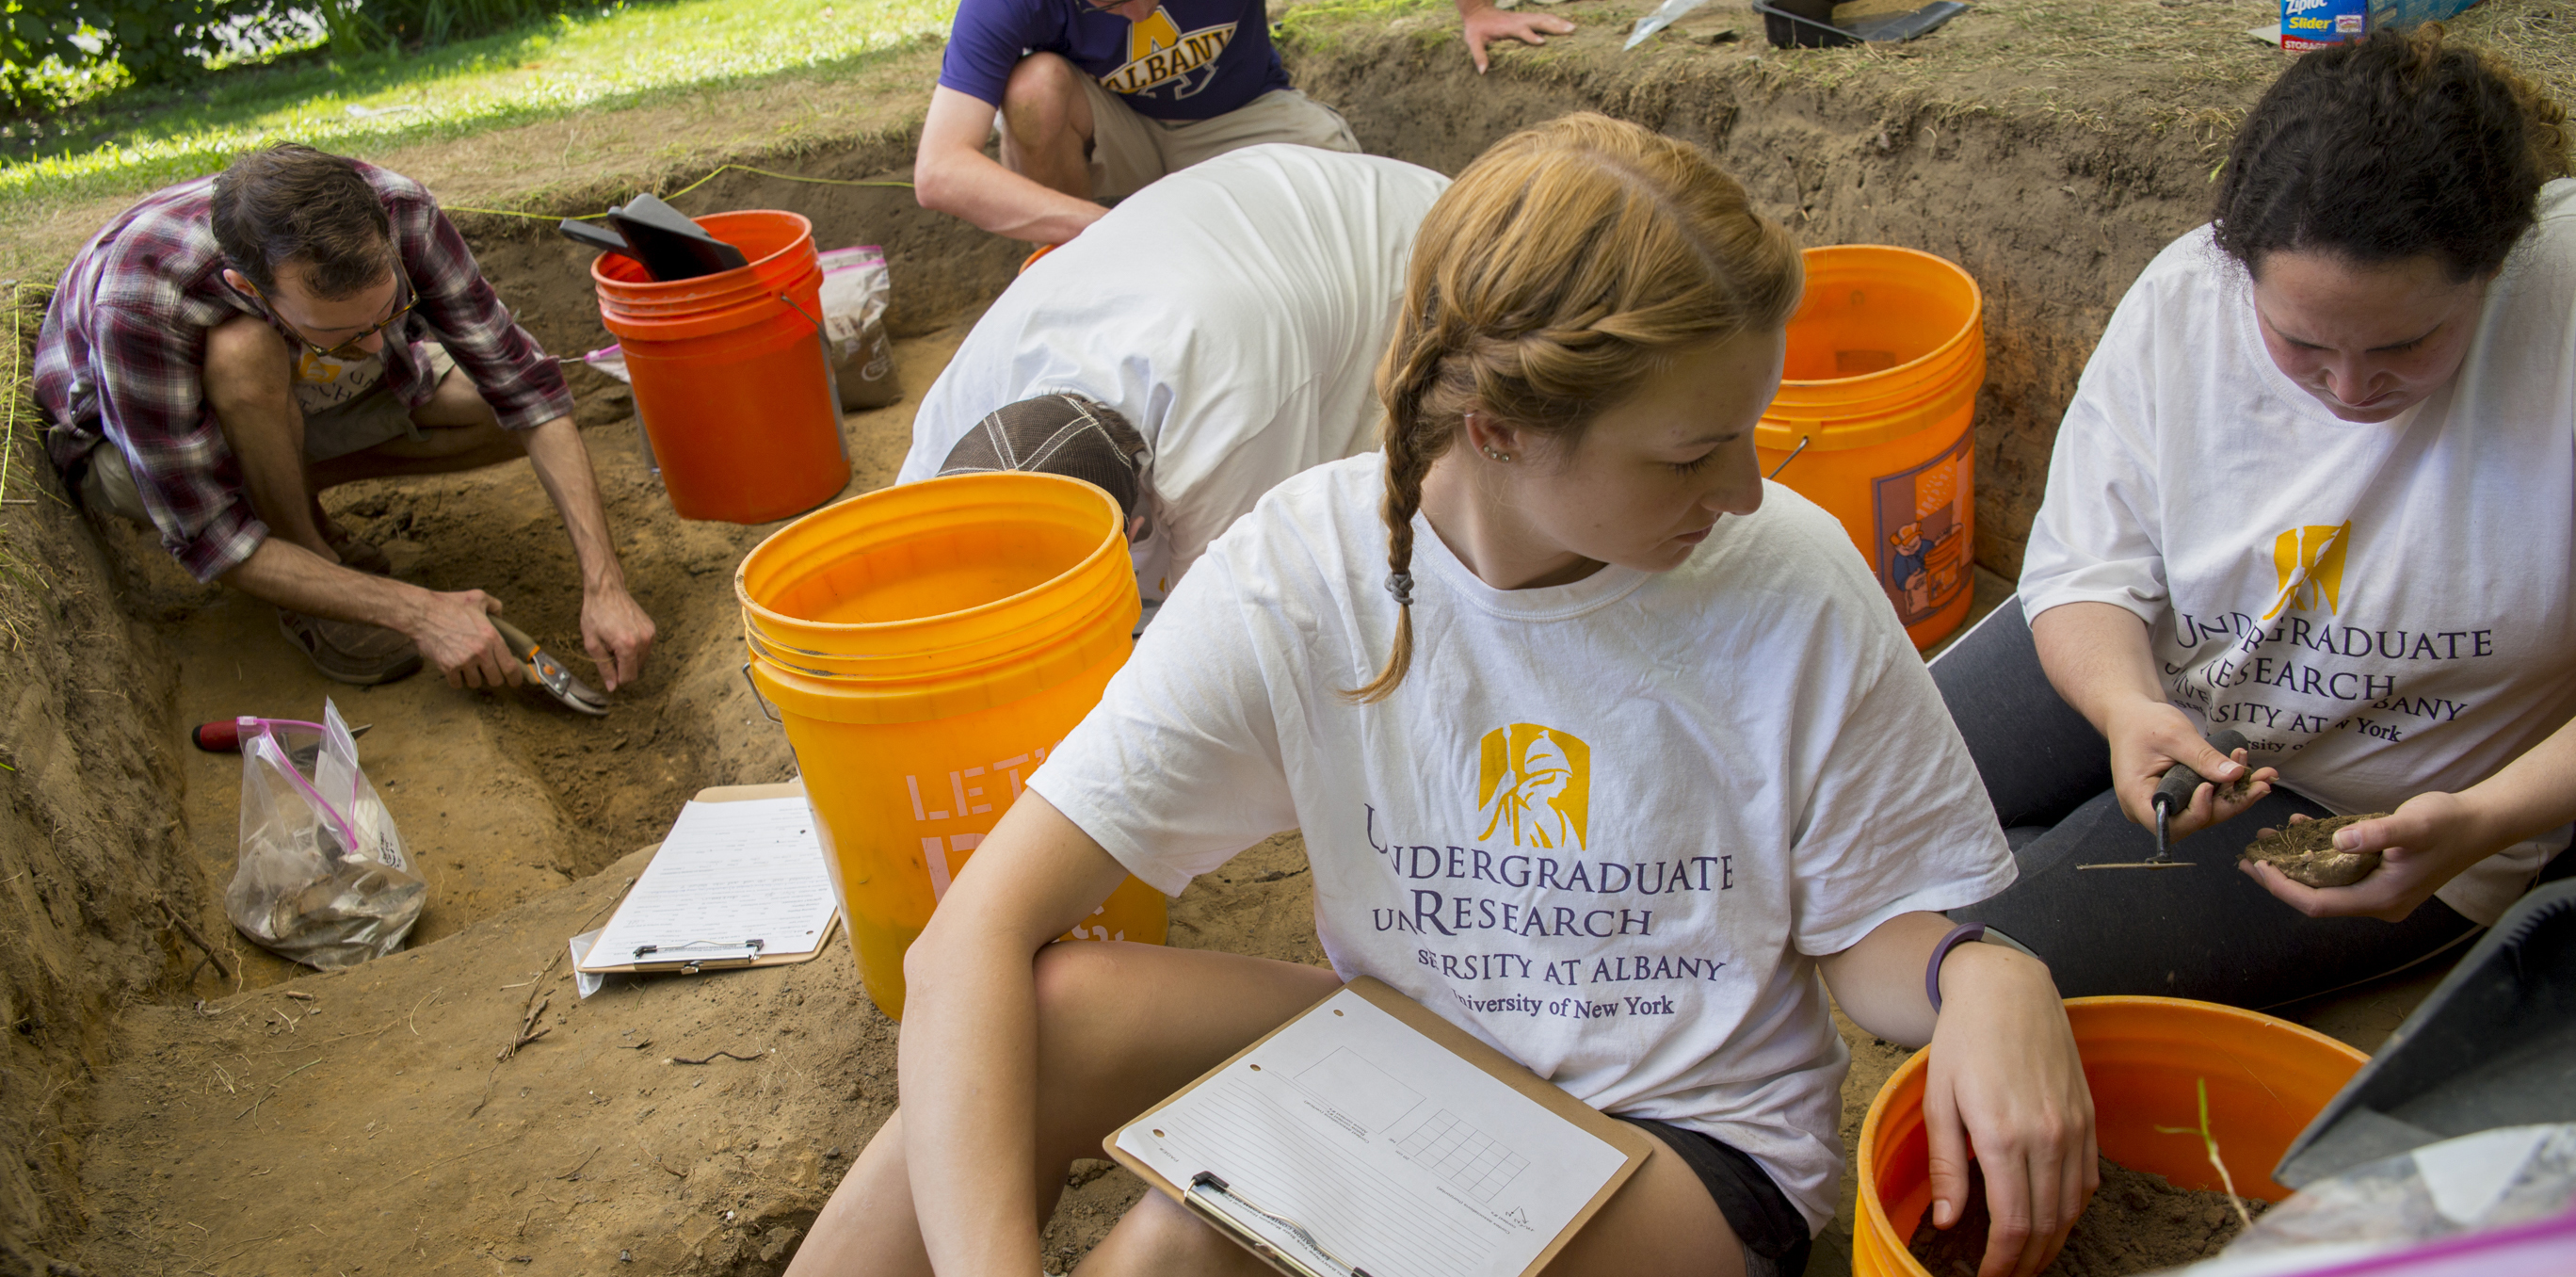 Five students wearing Undergraduate Research t-shirts excavate artifacts at the archaeology dig